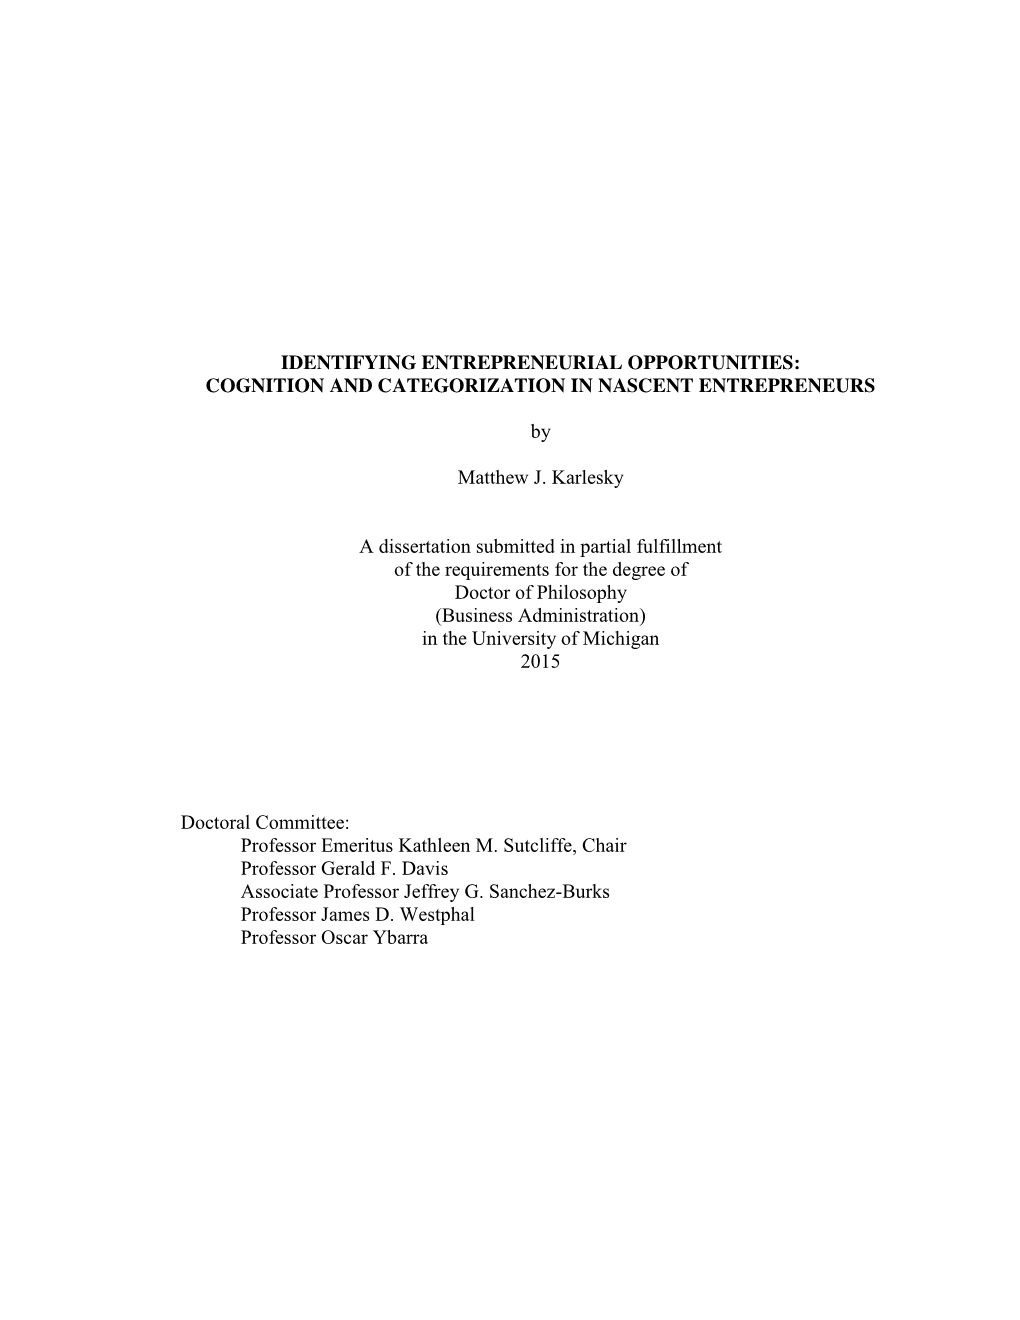 Identifying Entrepreneurial Opportunities: Cognition and Categorization in Nascent Entrepreneurs